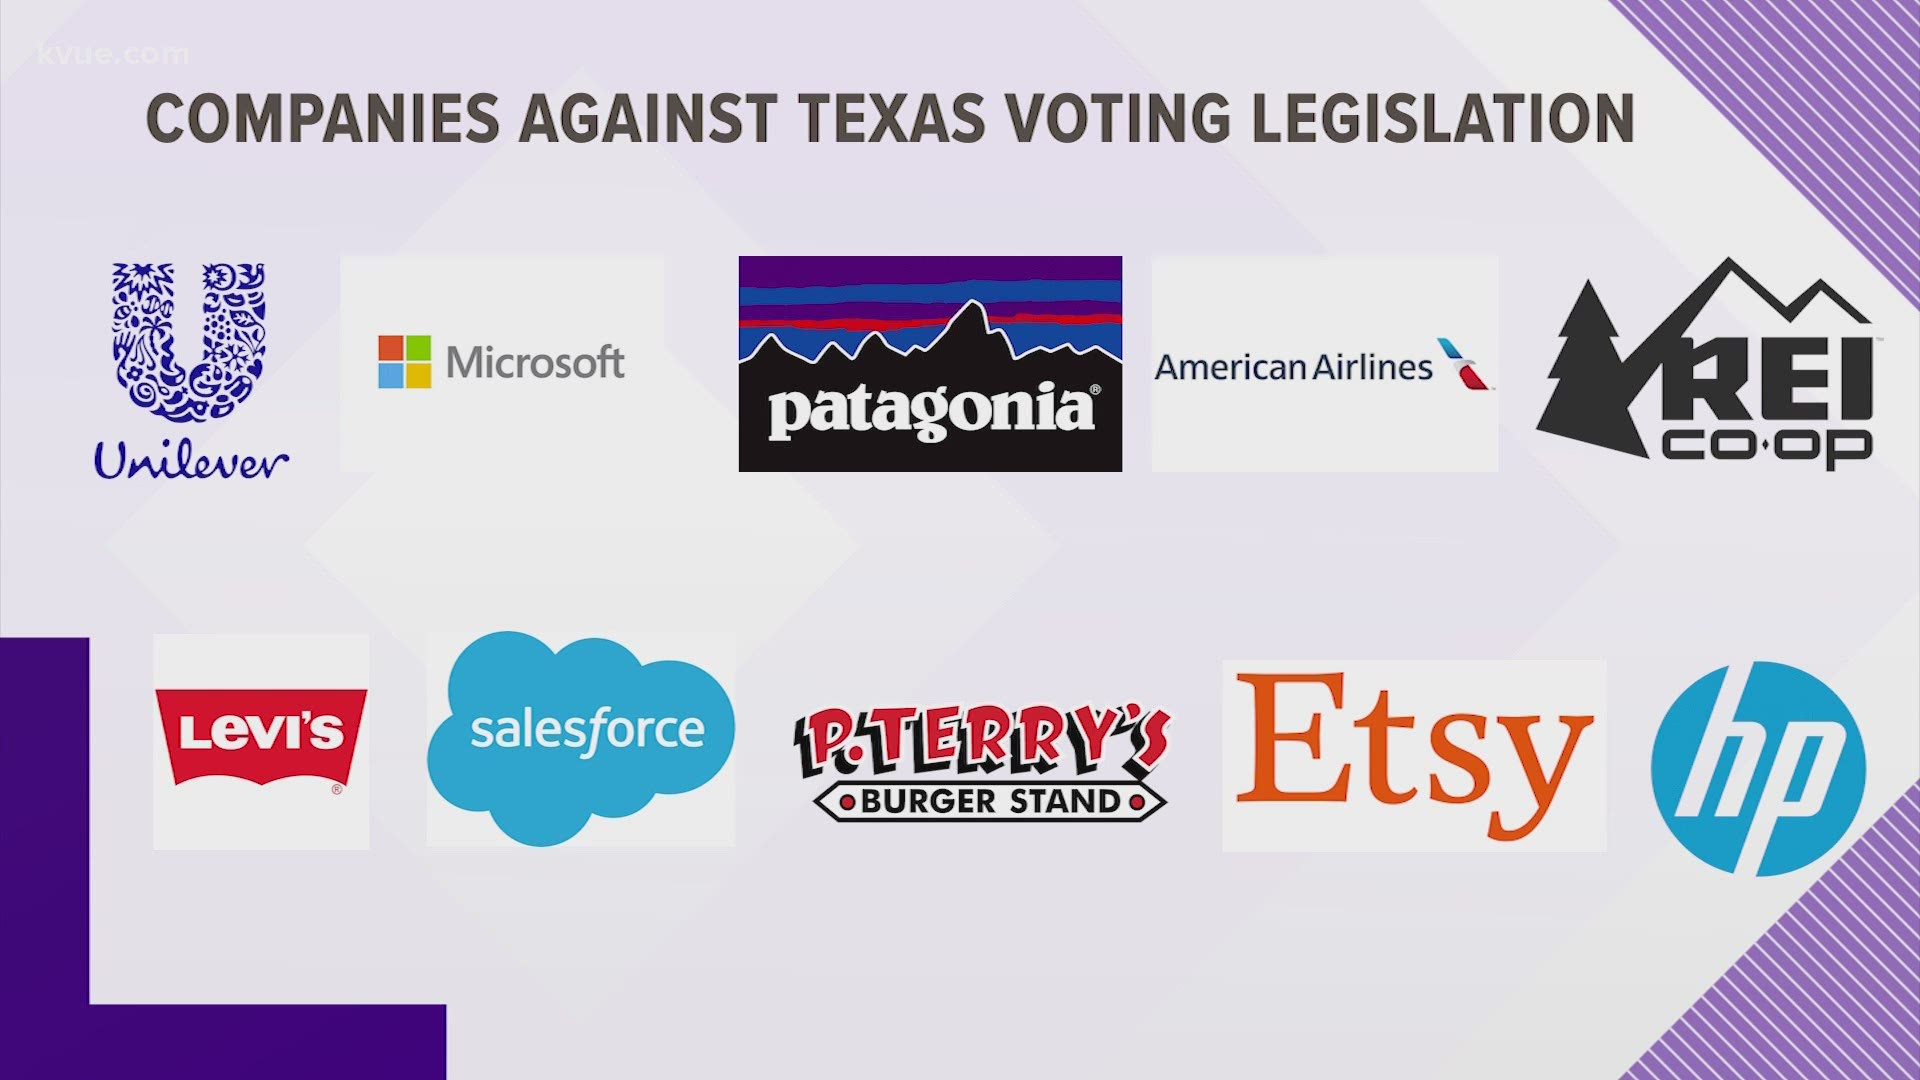 Companies across the country are asking Texas lawmakers not to pass so-called "election integrity" bills.